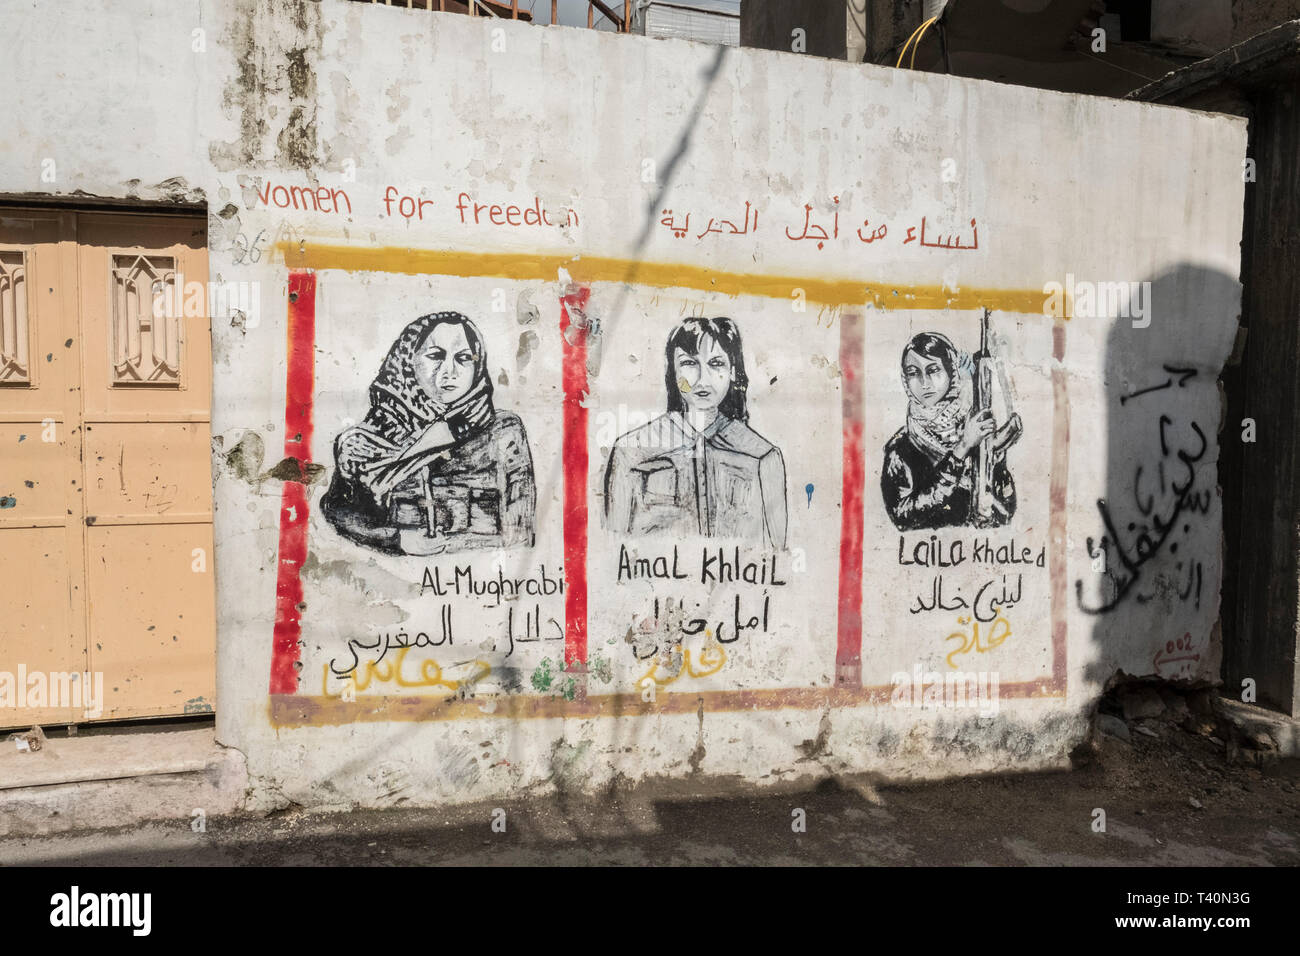 Street art showing Palestinian martyrs who lost their lives fighting what they saw as the Israeli occupation are painted on walls in Aida Camp, Bethlehem, West Bank, Palestine, 11/02/19 Stock Photo